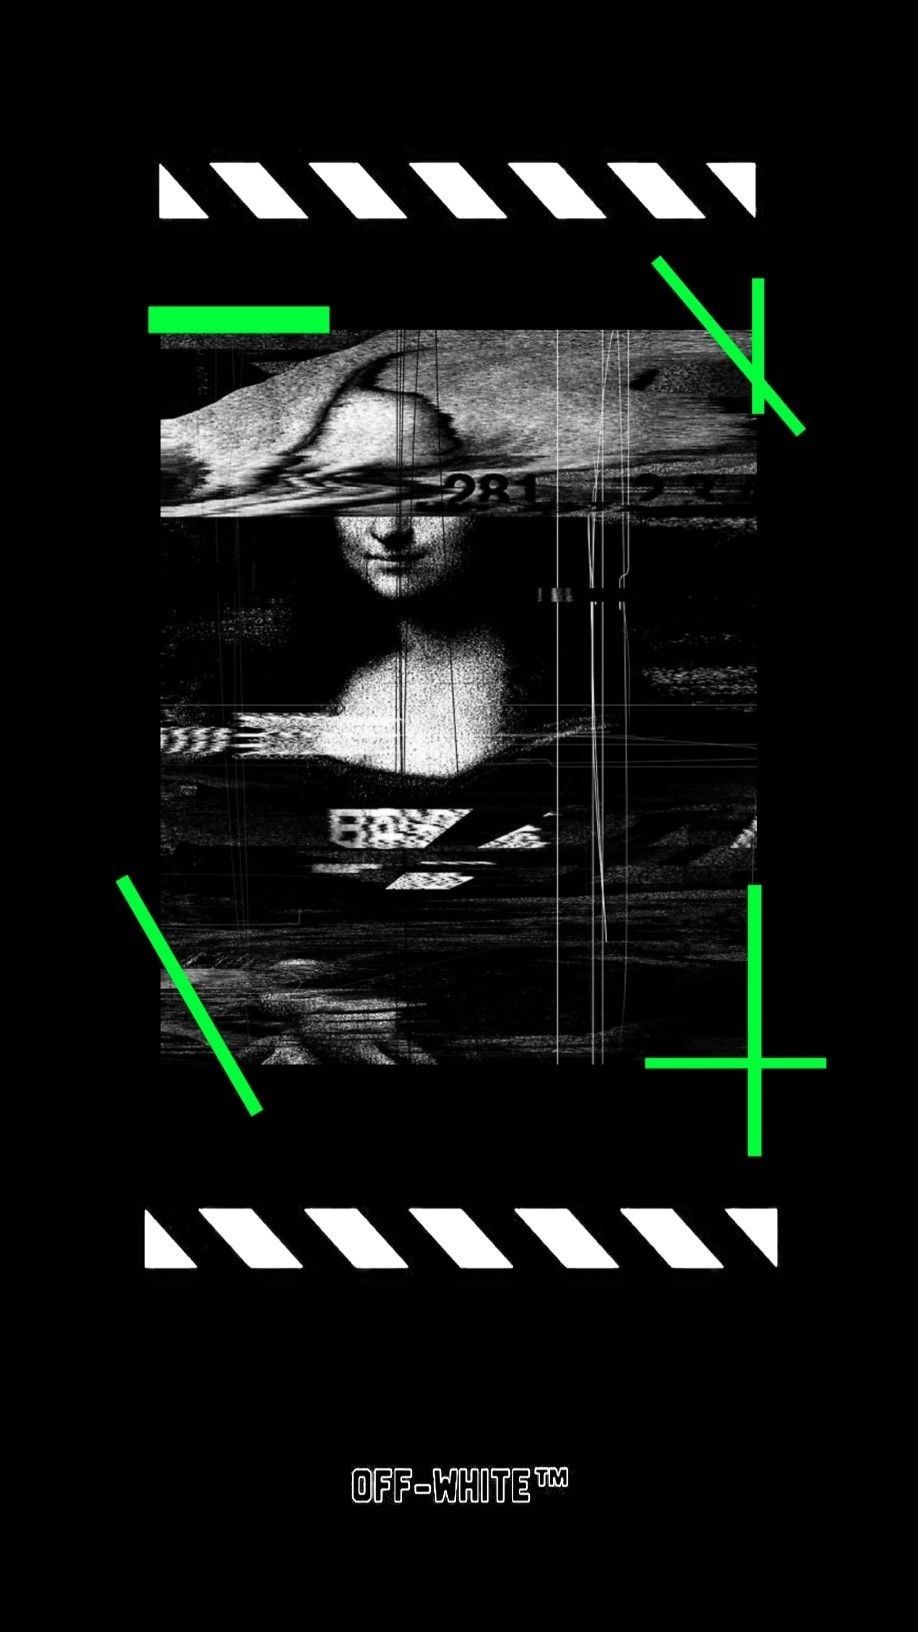 Off white wallpaper for android phone and iphone - Off-White, Mona Lisa